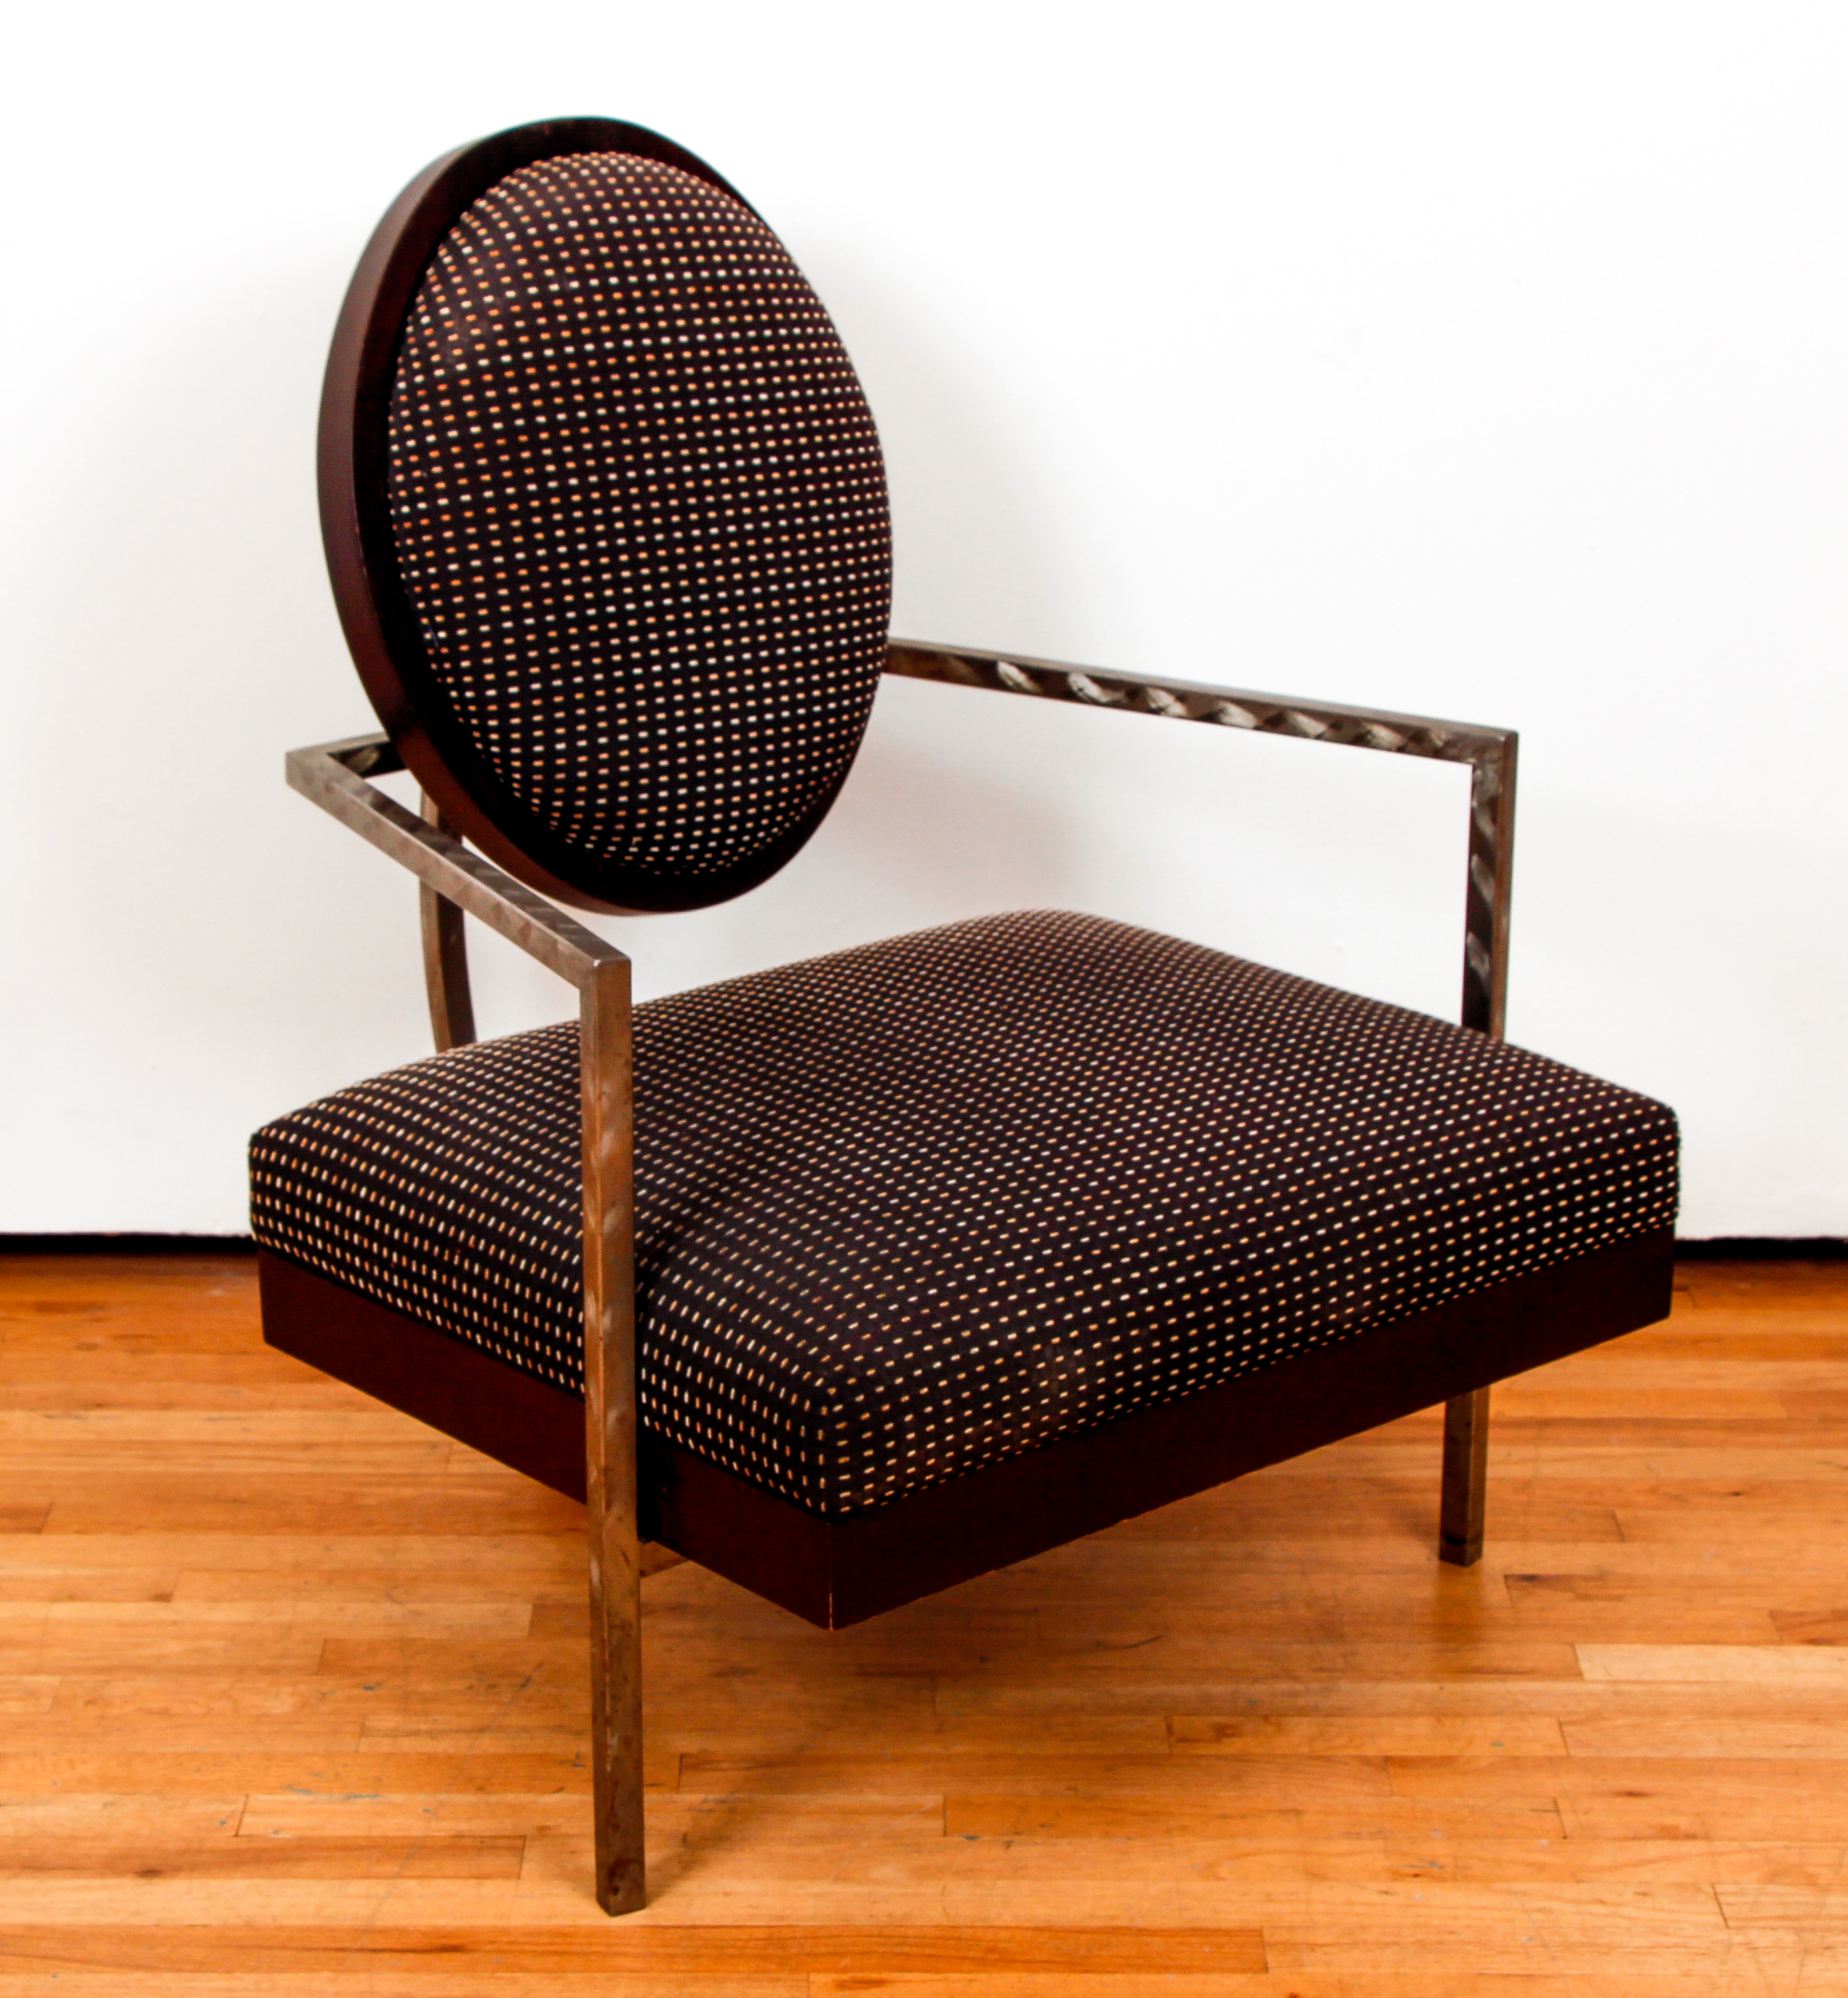 Modern Lounge Chair with cantilevered back cushion - Image 2 of 7